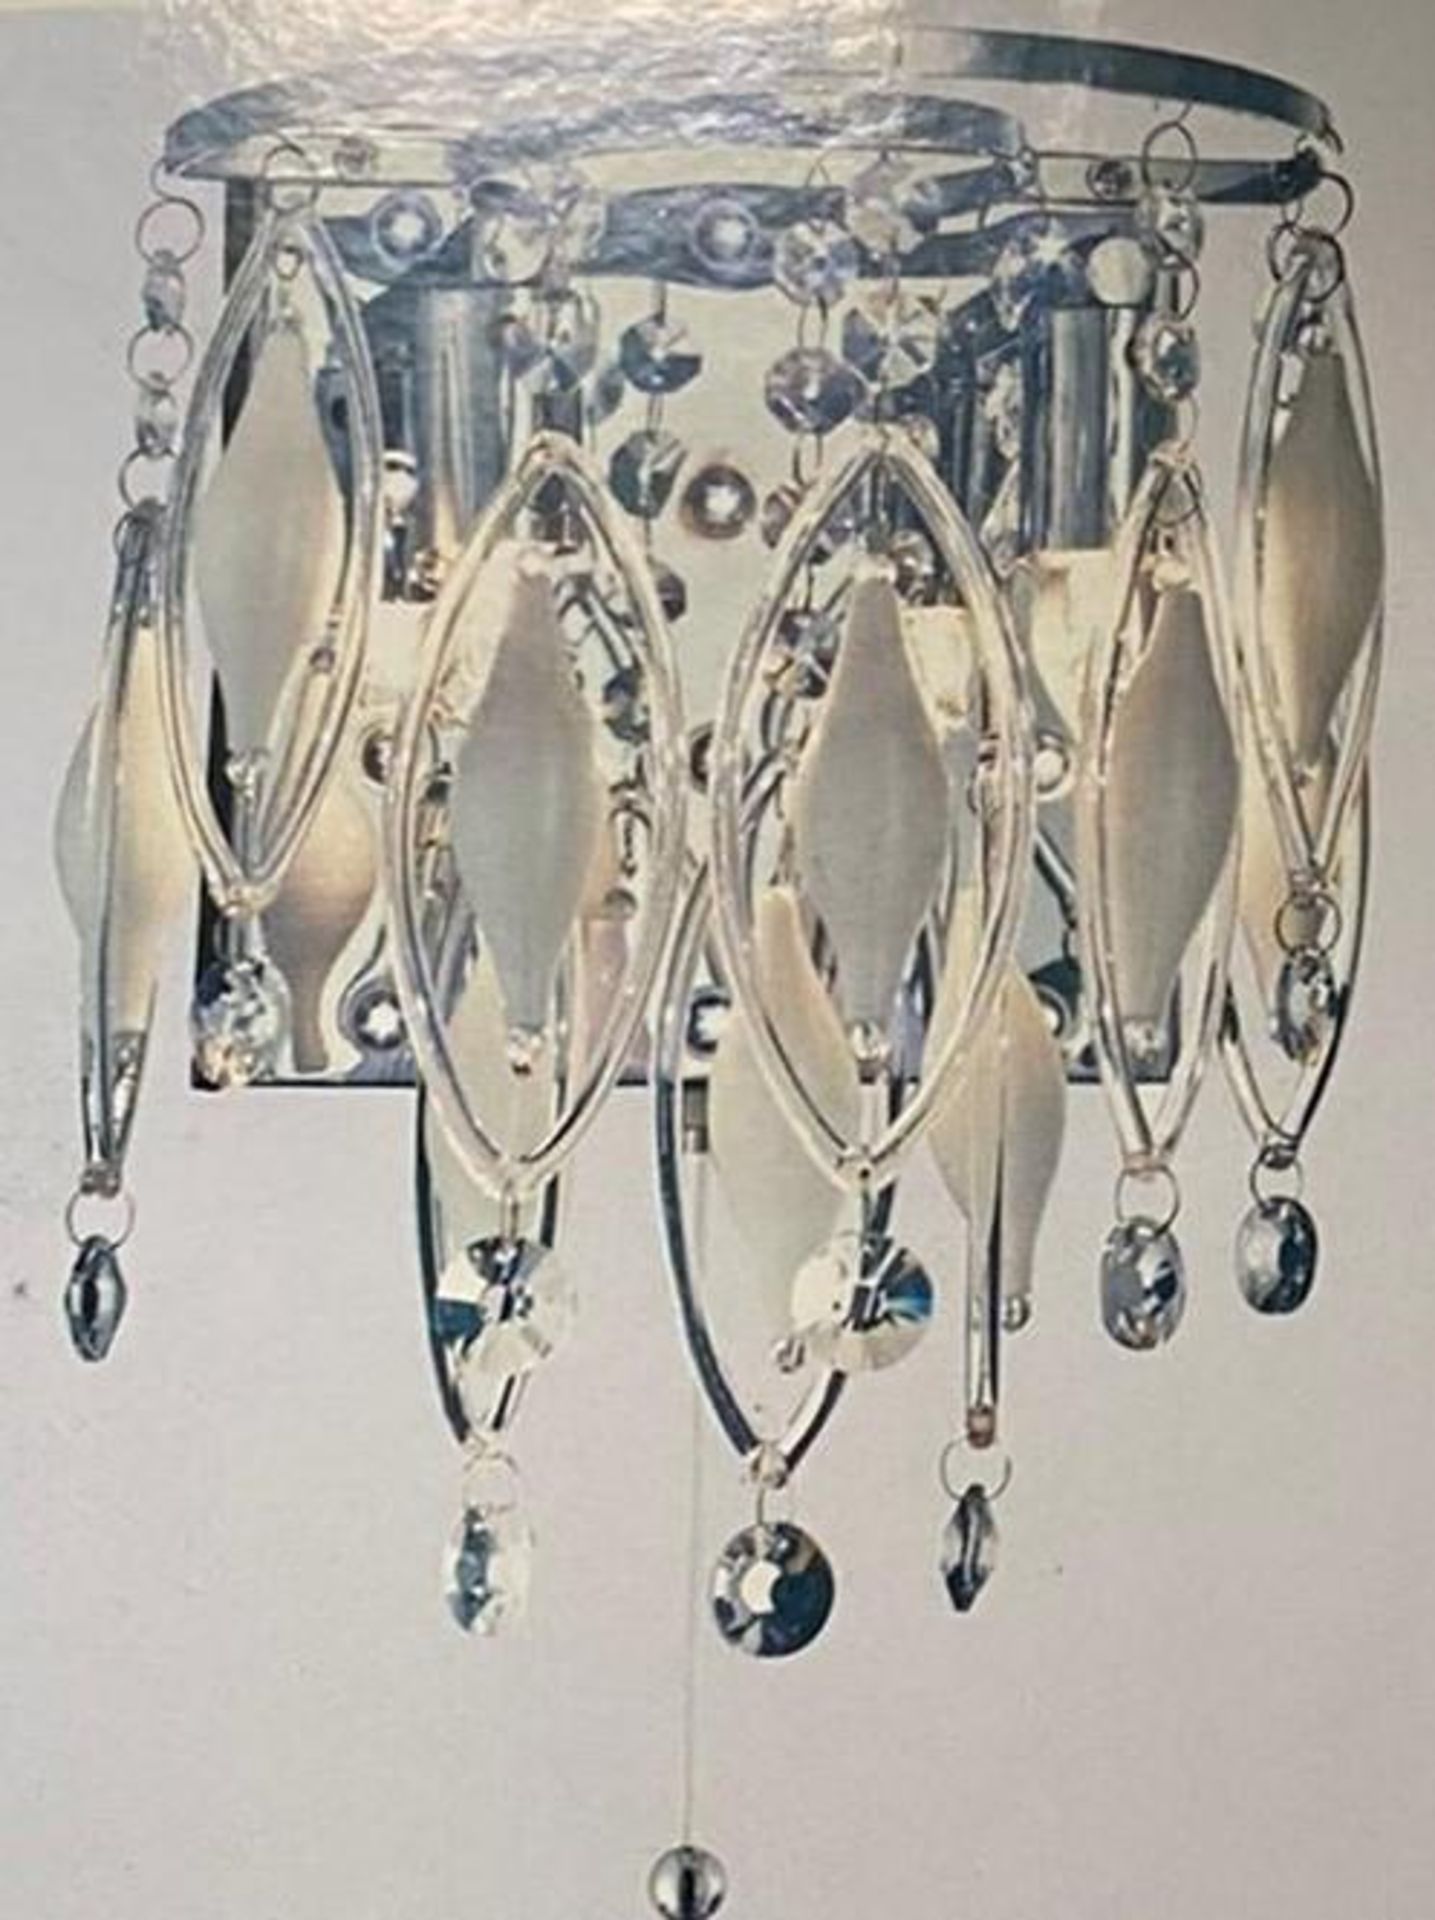 1 x Searchlight Spindle Wall Bracket in a chrome finish with white and clear glass drops - Ref: 3352